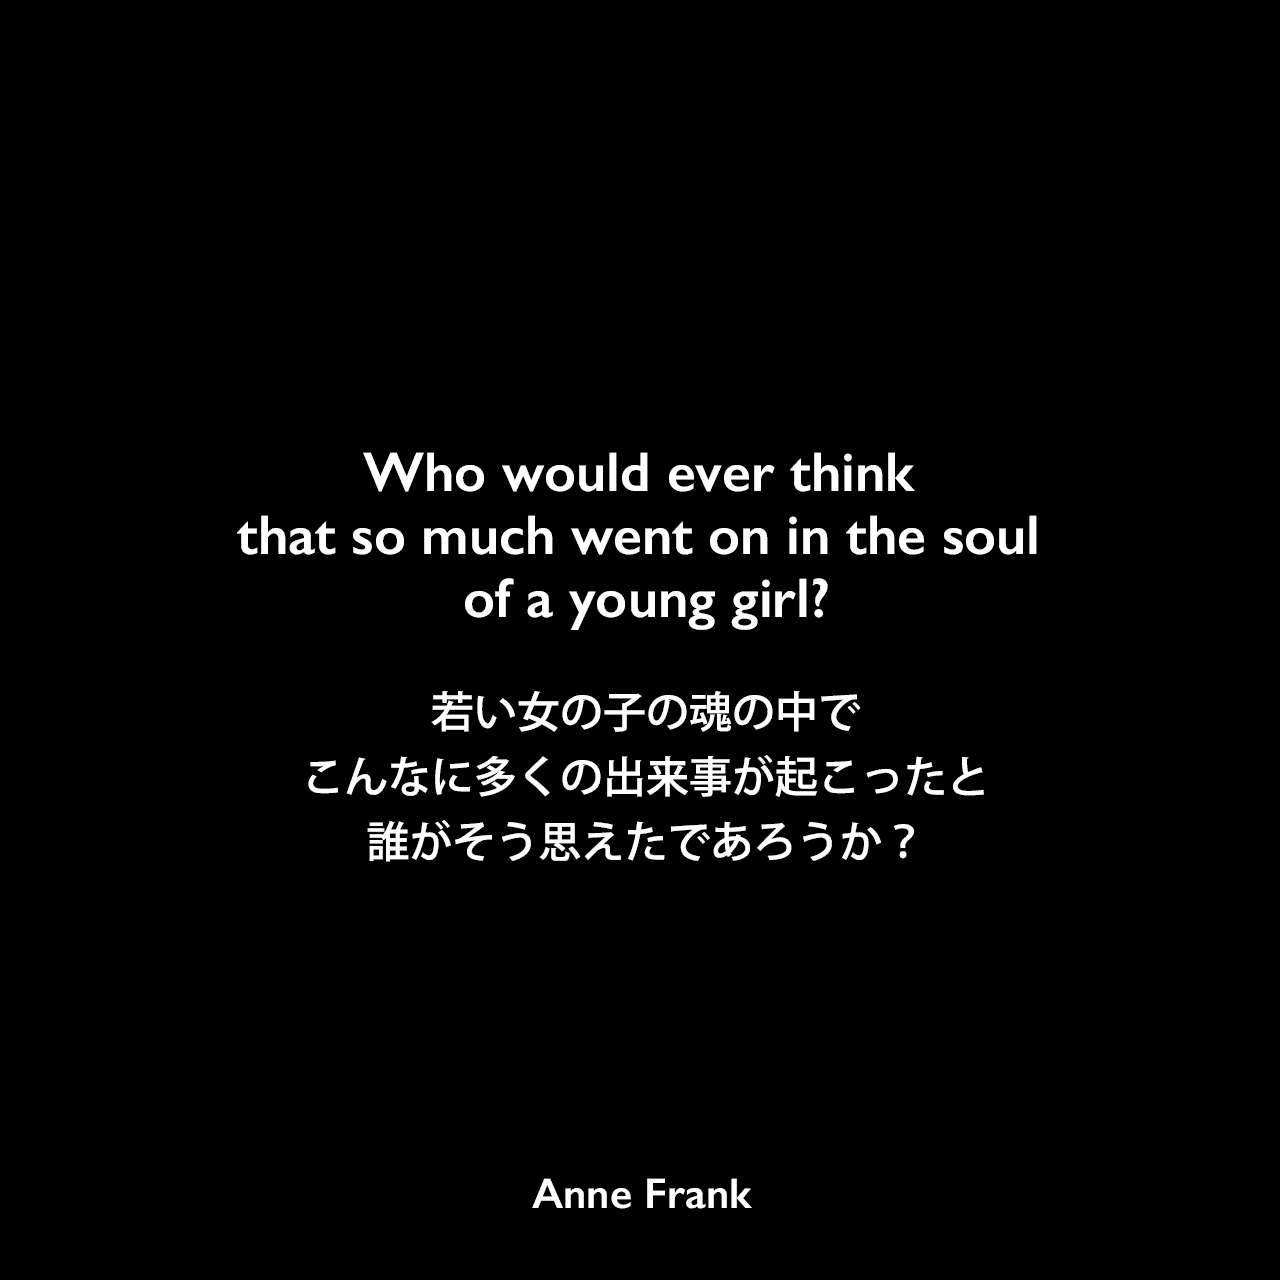 Who would ever think that so much went on in the soul of a young girl?若い女の子の魂の中でこんなに多くの出来事が起こったと誰がそう思えたであろうか？- 「アンネの日記」よりAnne Frank